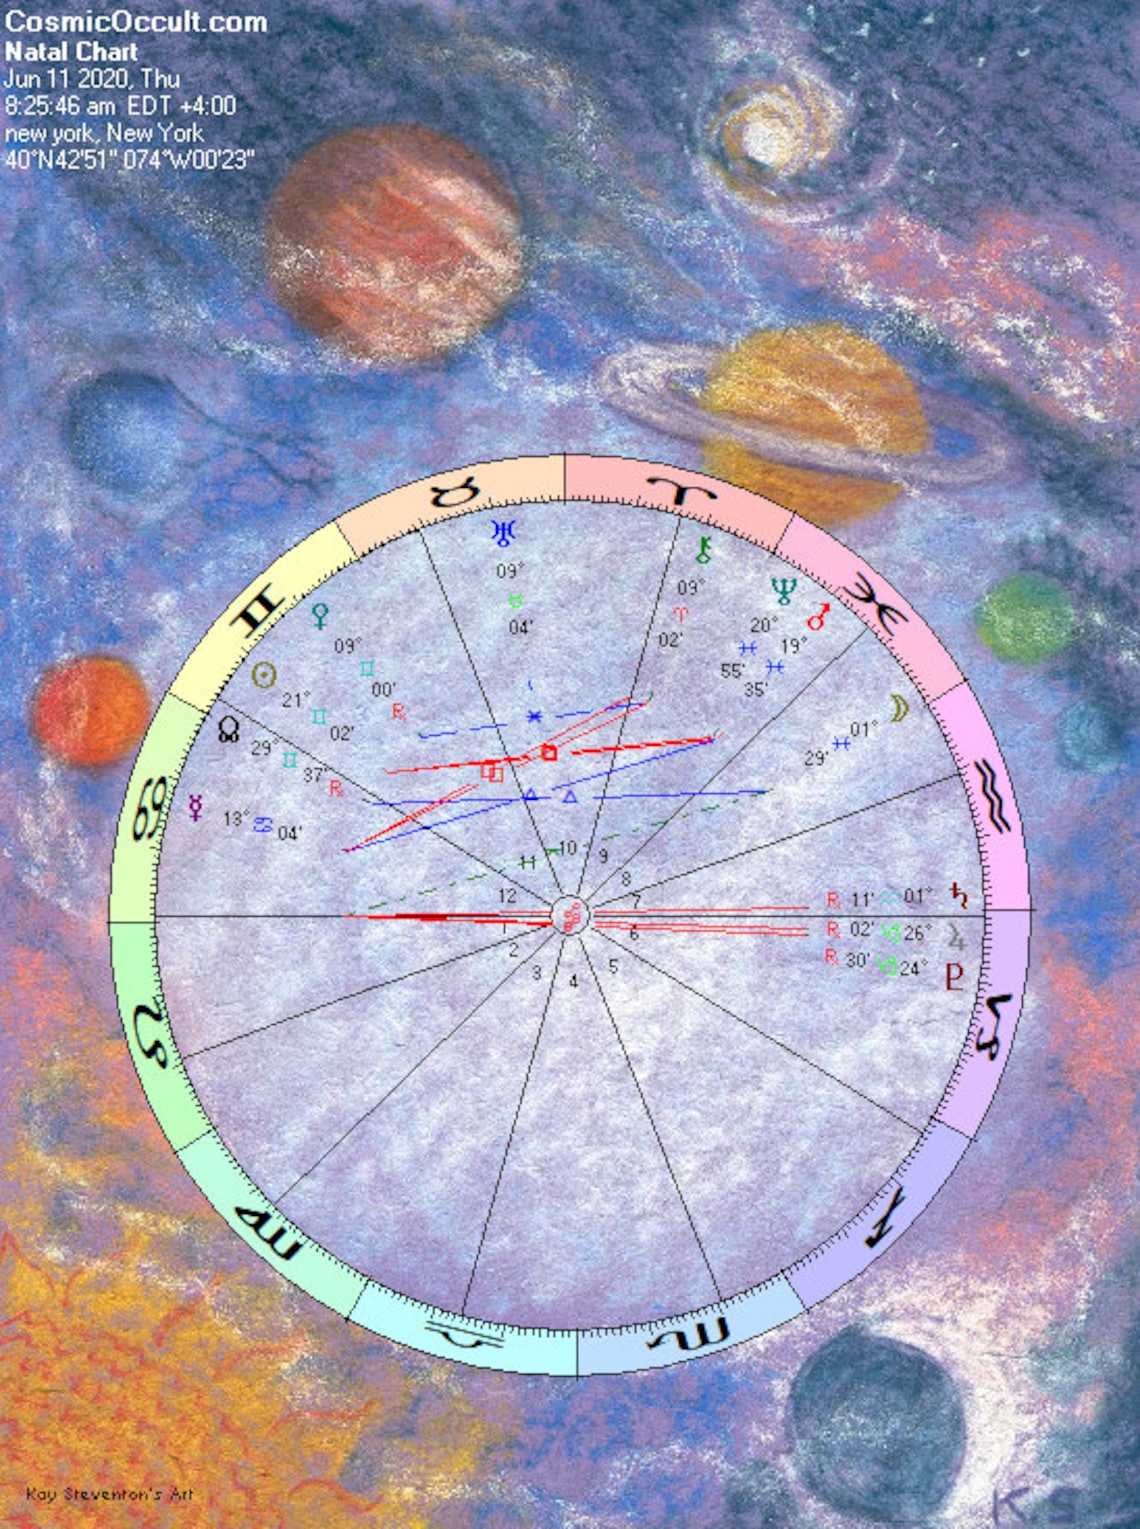 Astrology Transit Chart Lifetime Overview of Transits From Etsy